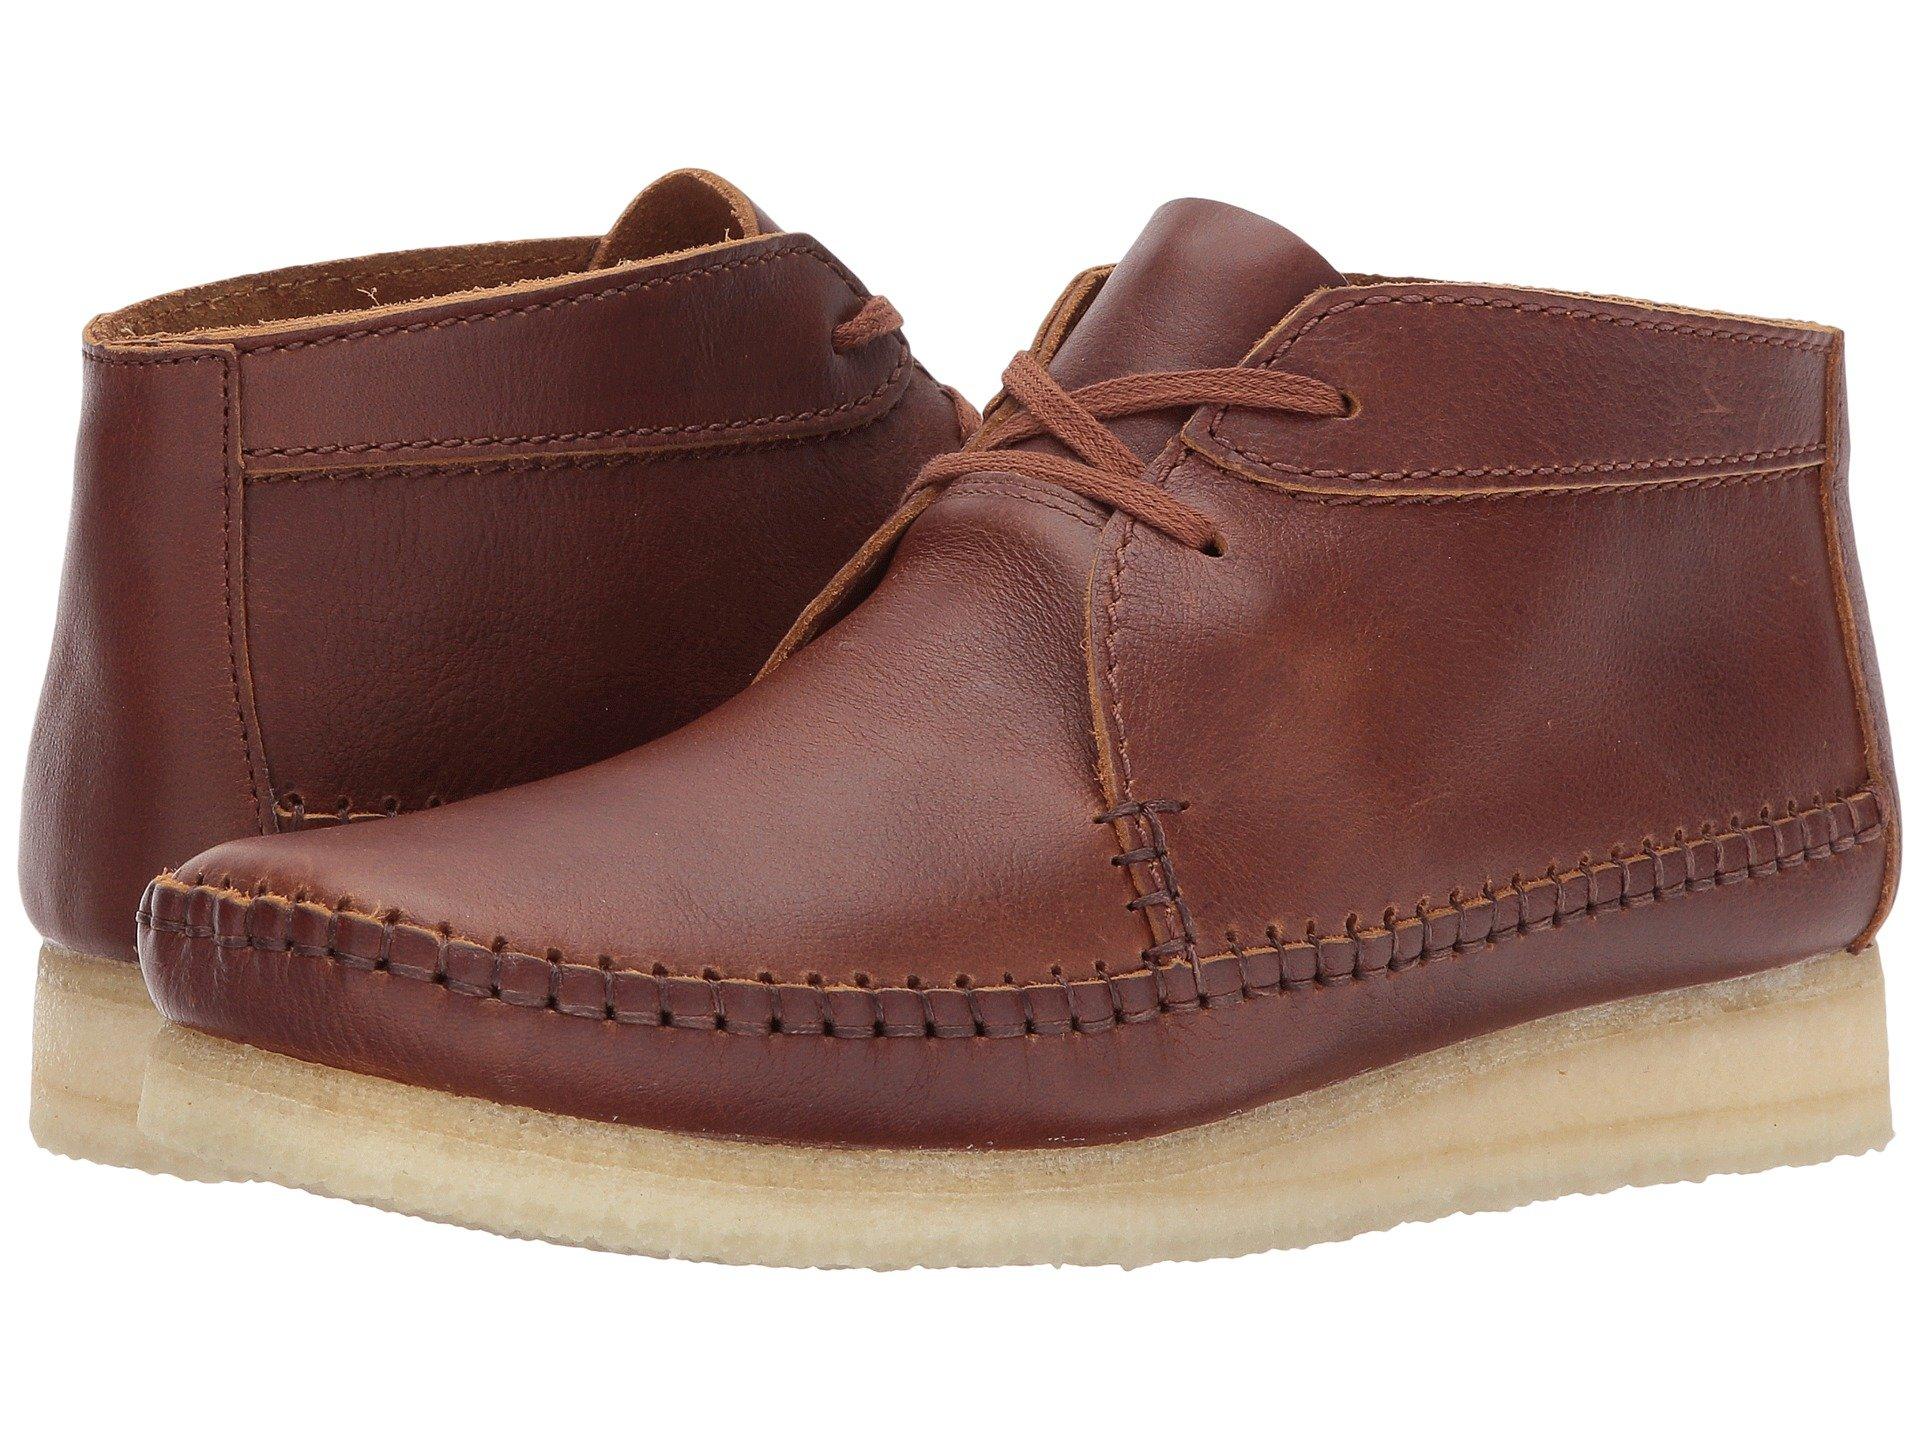 Clarks Weaver Boot In Tan Leather 